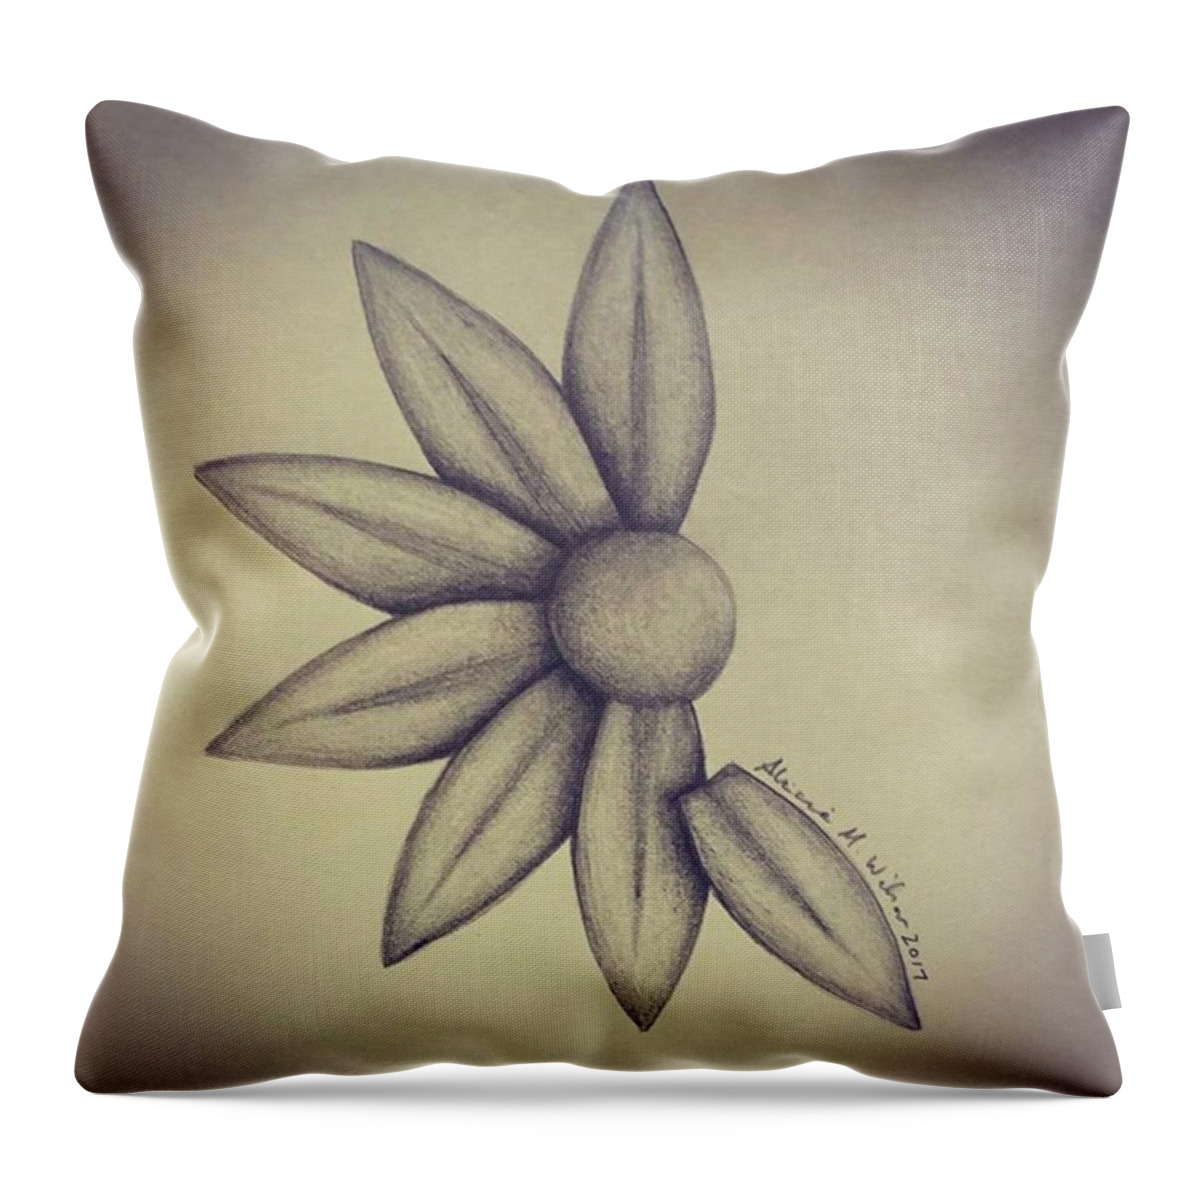 Knowledgeispower Throw Pillow featuring the photograph #sketch #doodle #draw #art #7 by Lee Lee Luv